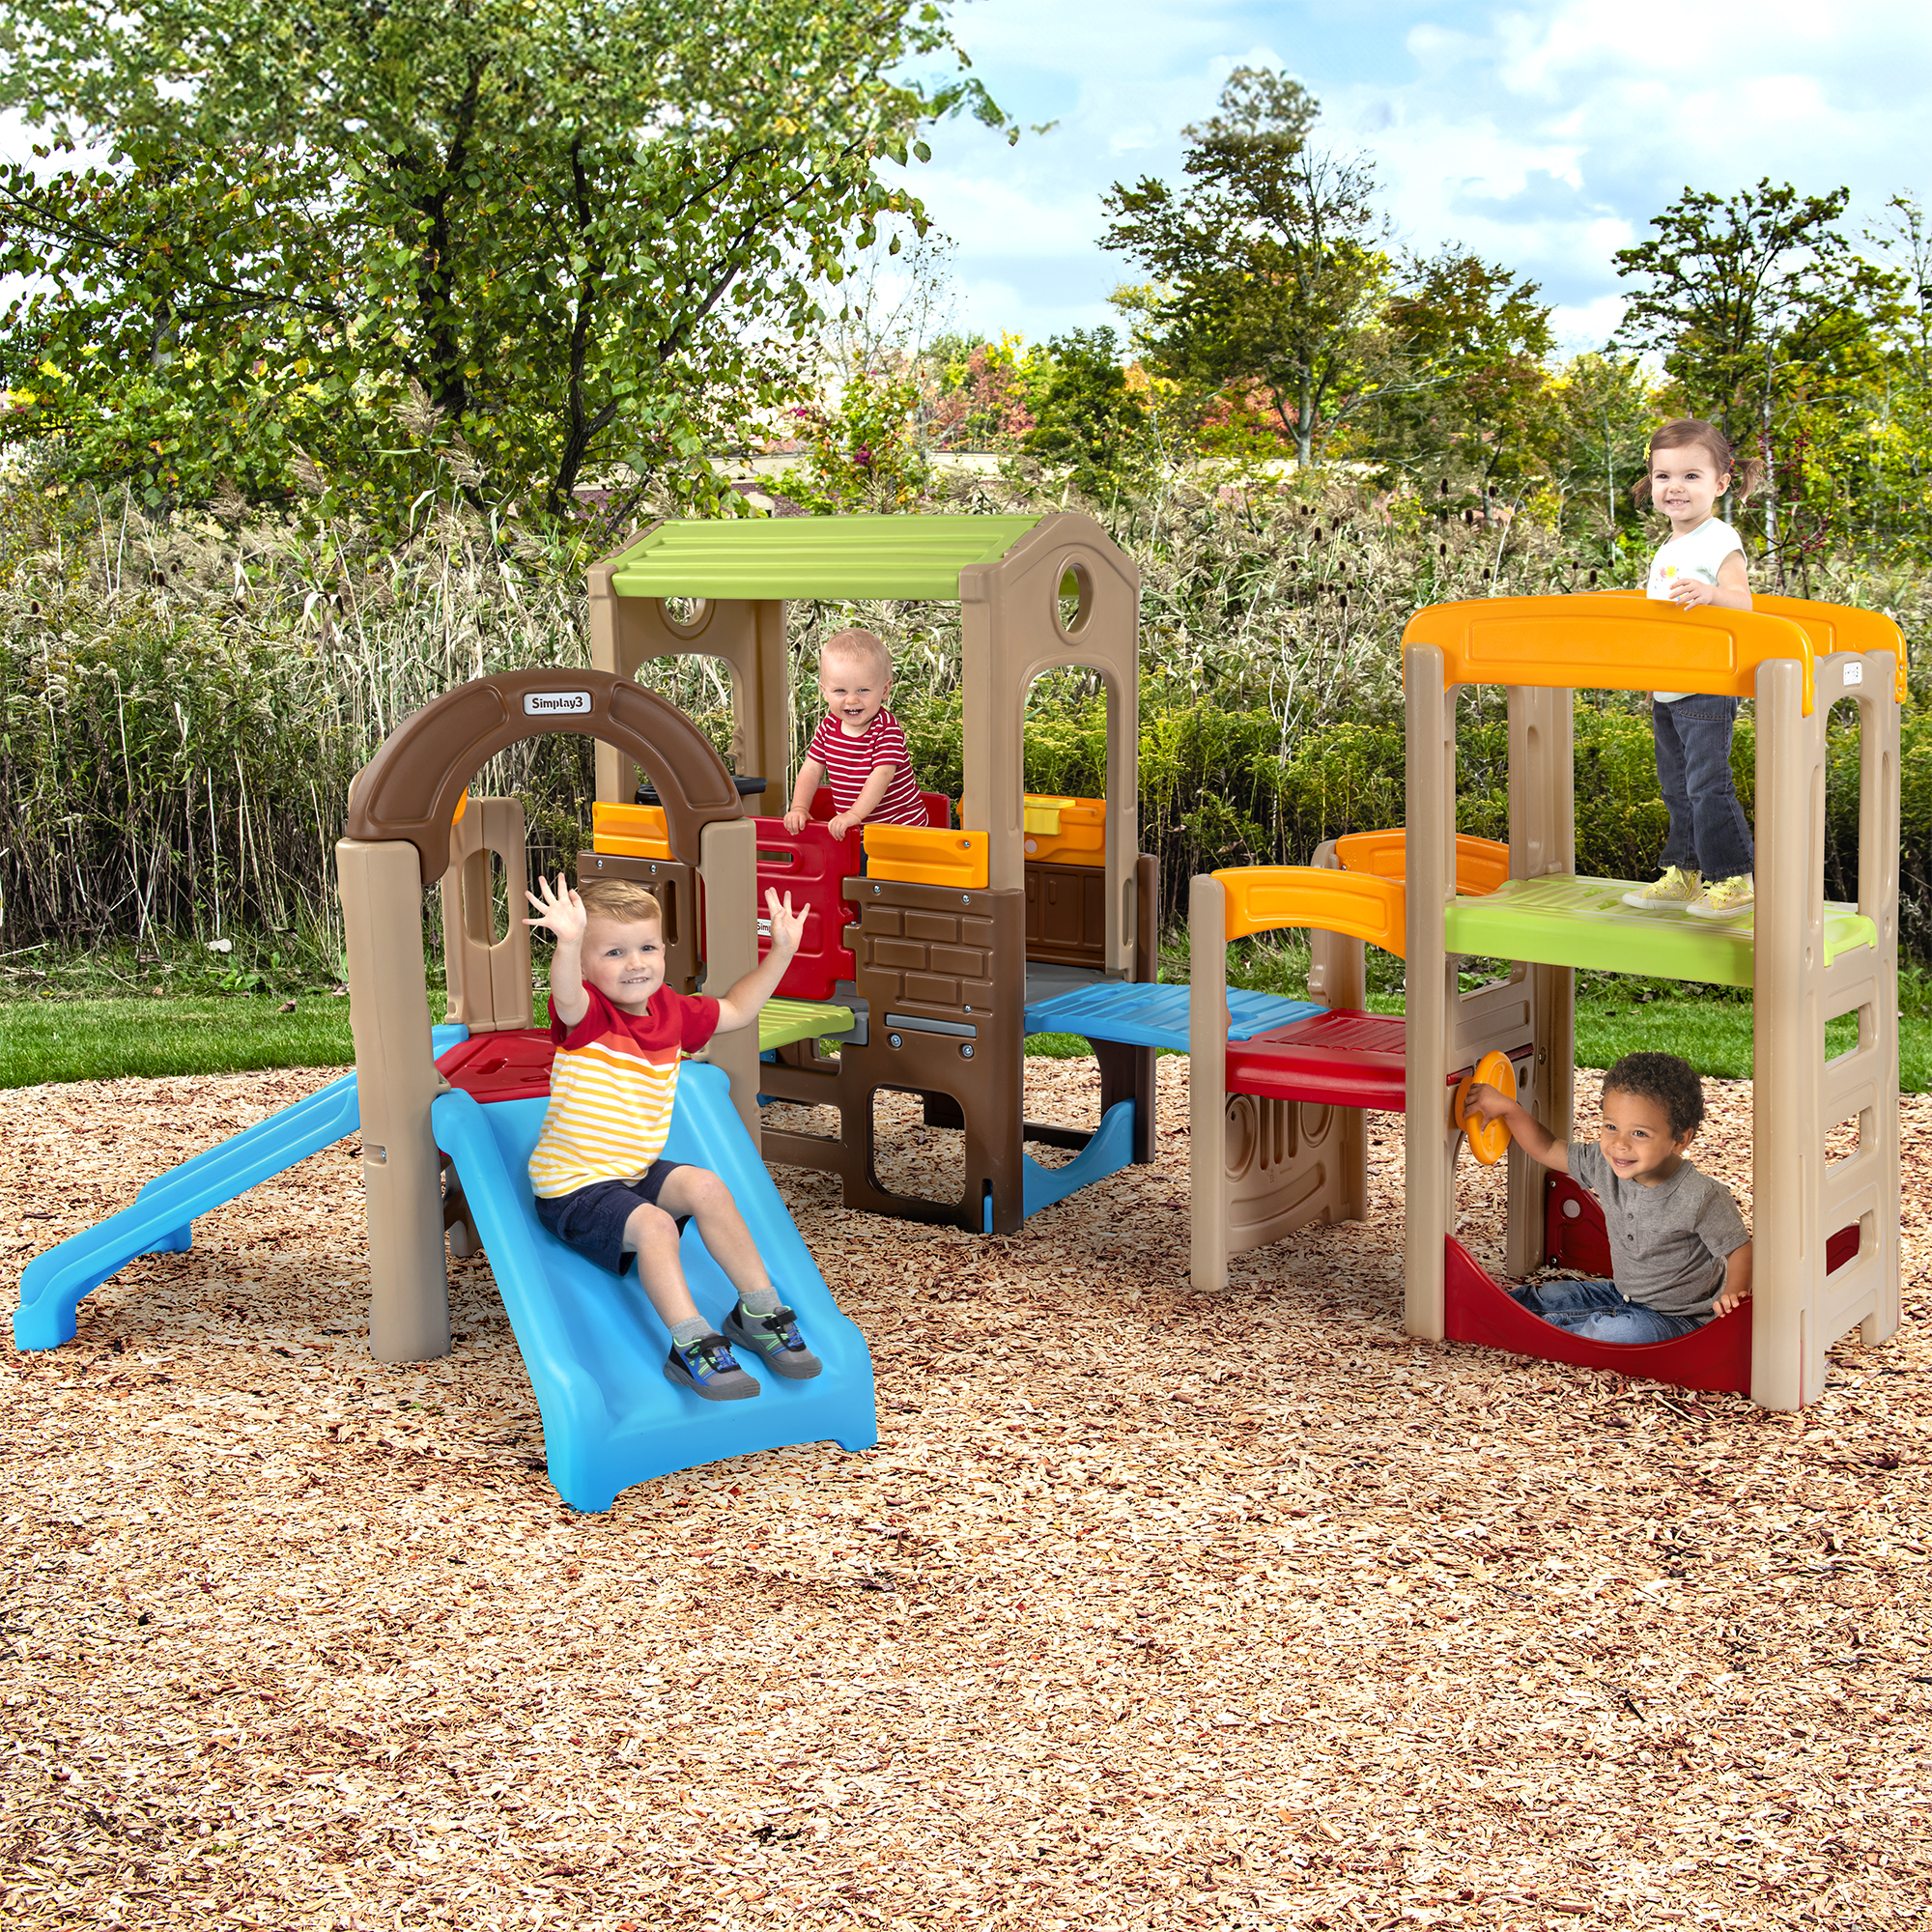 Young Explorers Modular Play System, playset, playground for kids, outdoor playset. made in the usa